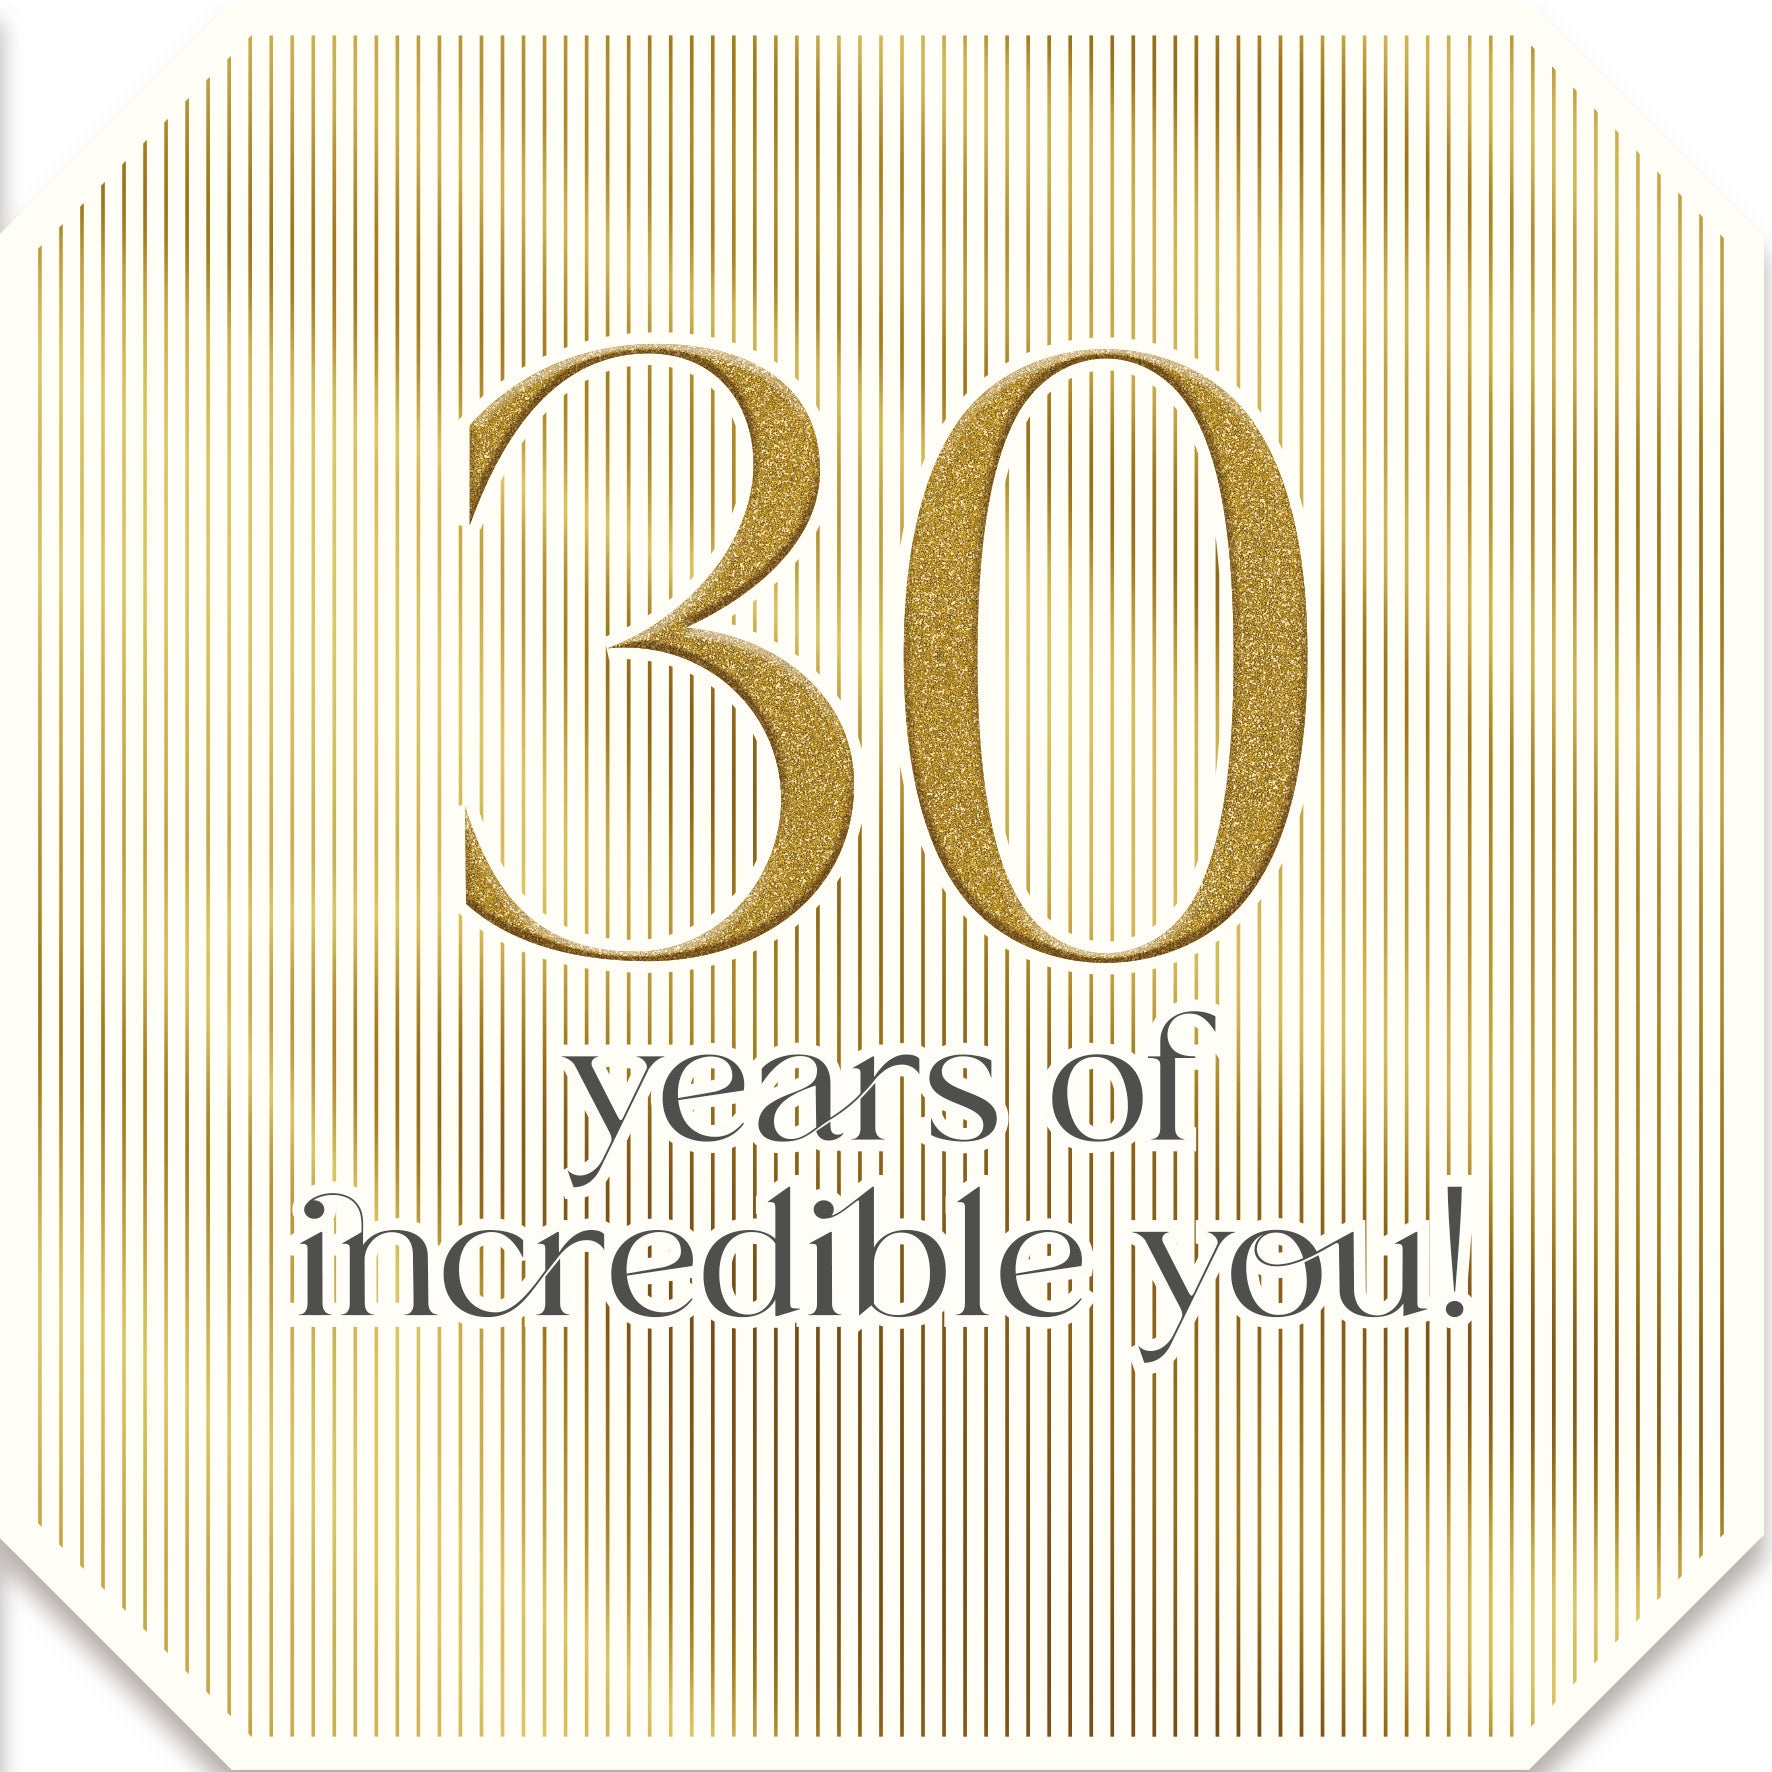 30 Years of Incredible You Birthday Card from Penny Black